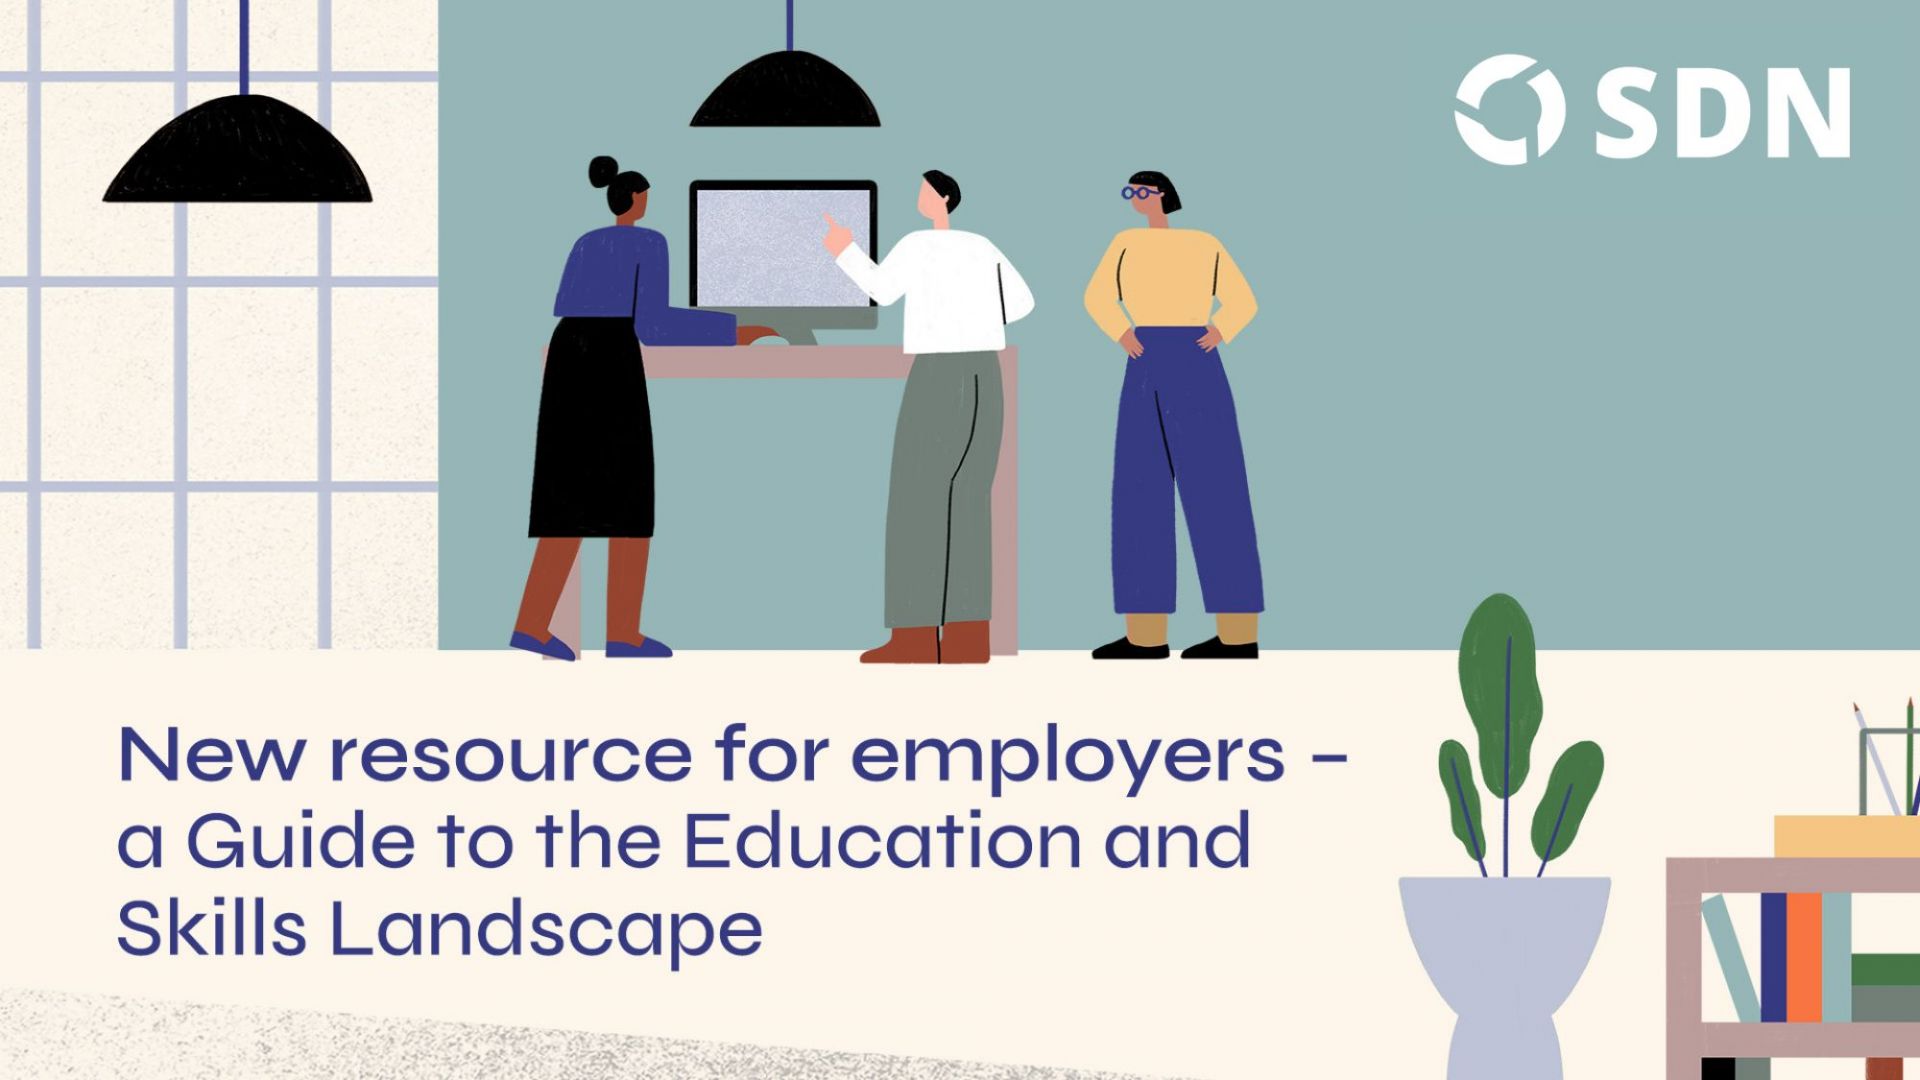 THE EDUCATION LANDSCAPE: A guide for employers.